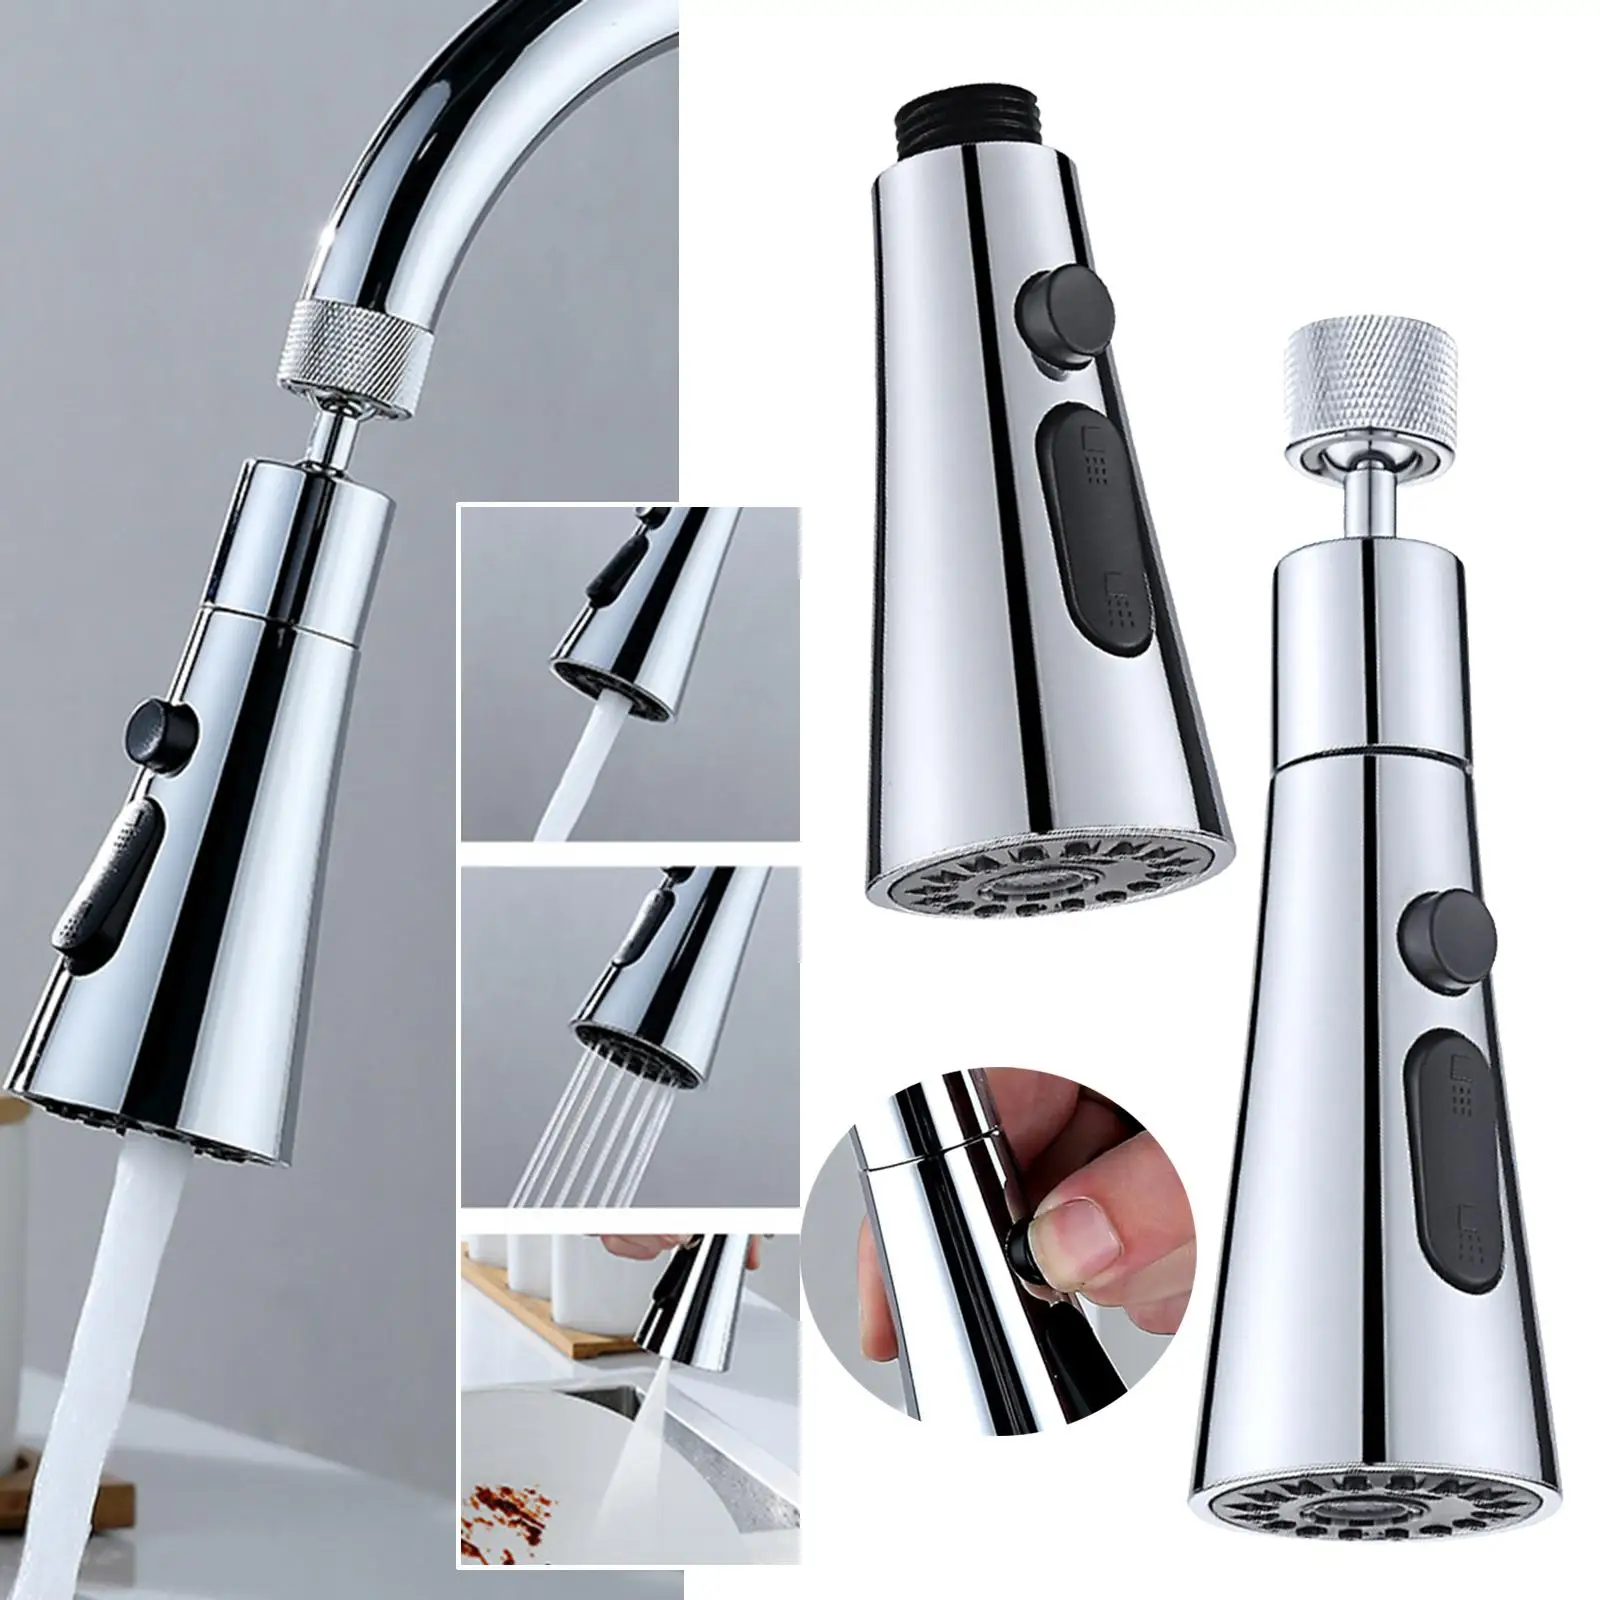 360 Degree Rotatable Faucet Sprayer Faucet Aerator Kitchen Sink Accessories Kitchen Sink Faucet for Home Bathroom Kitchen